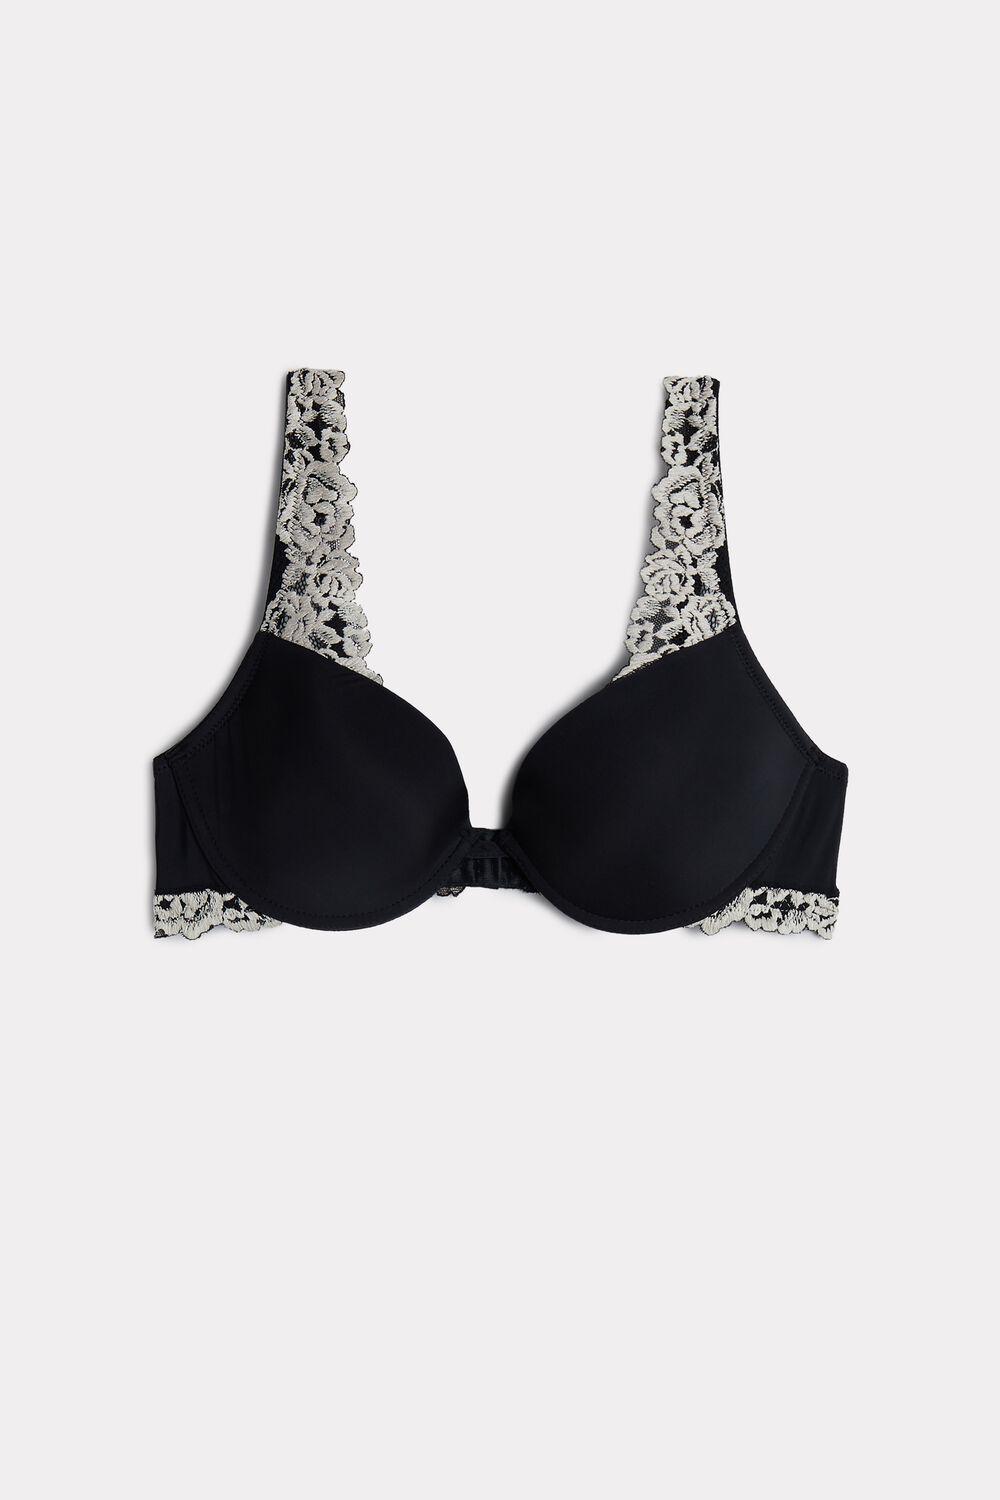 Intimissimi Lace Pretty Flowers Bellissima Push-up Bra in Black/Ivory ...